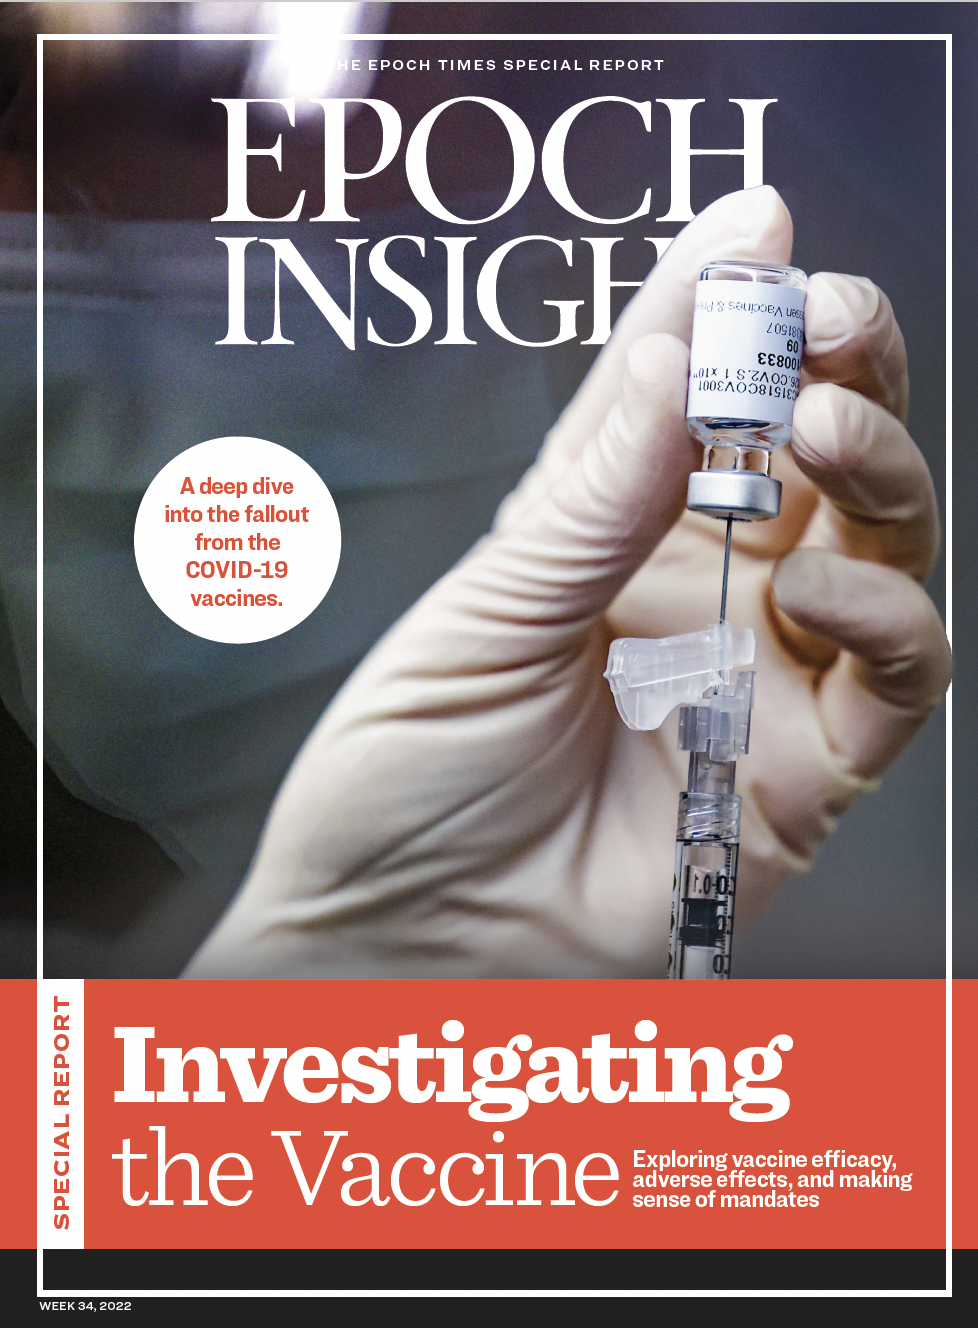 Special Report: Investigating the Vaccine